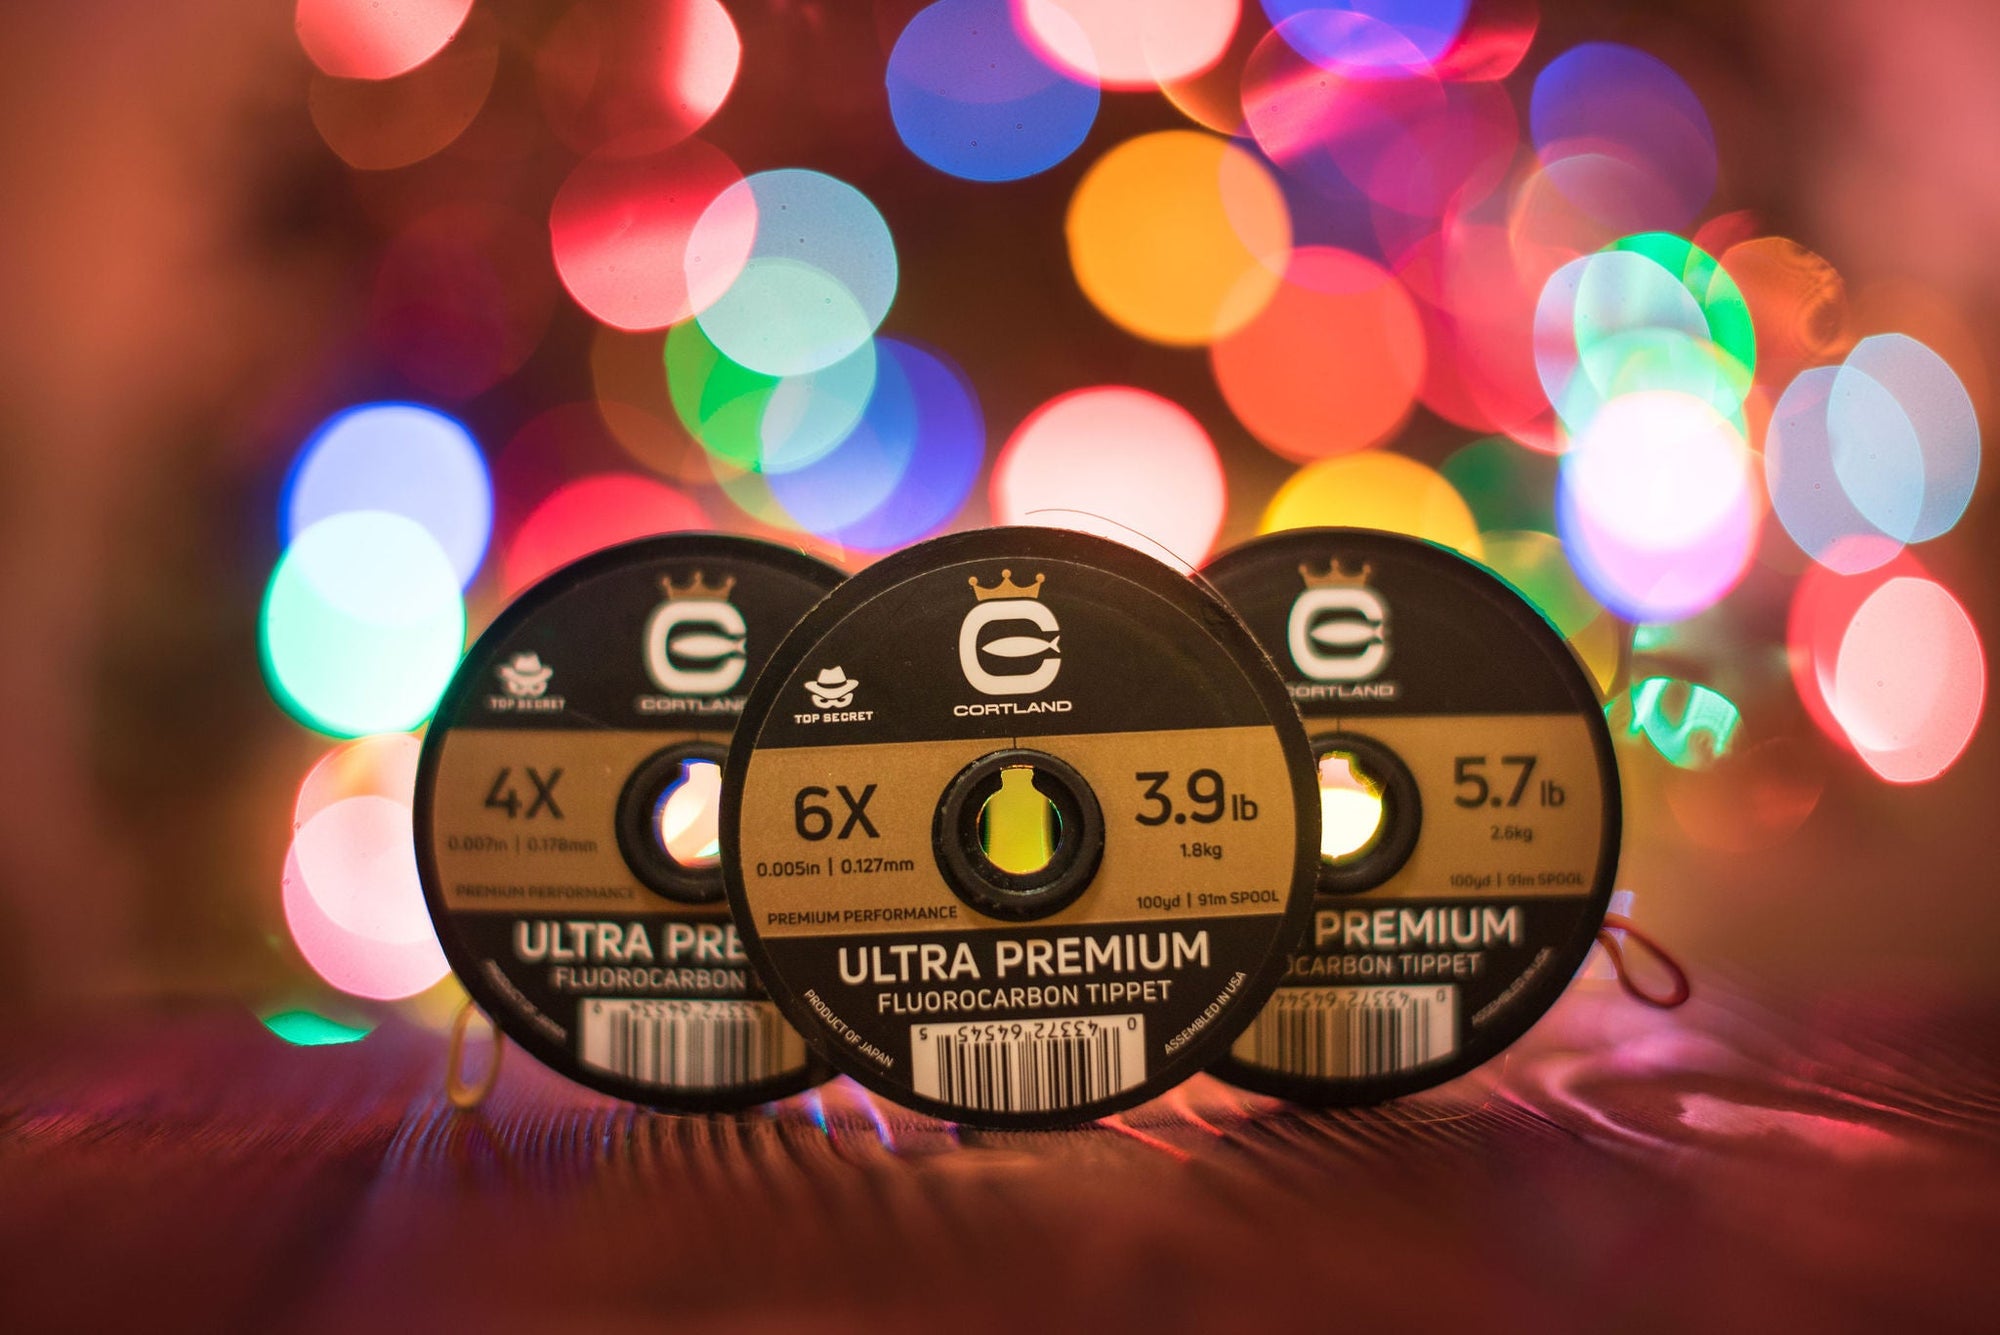 Three Ultra Premium Fluorocarbon Tippets with Christmas lights in the background 